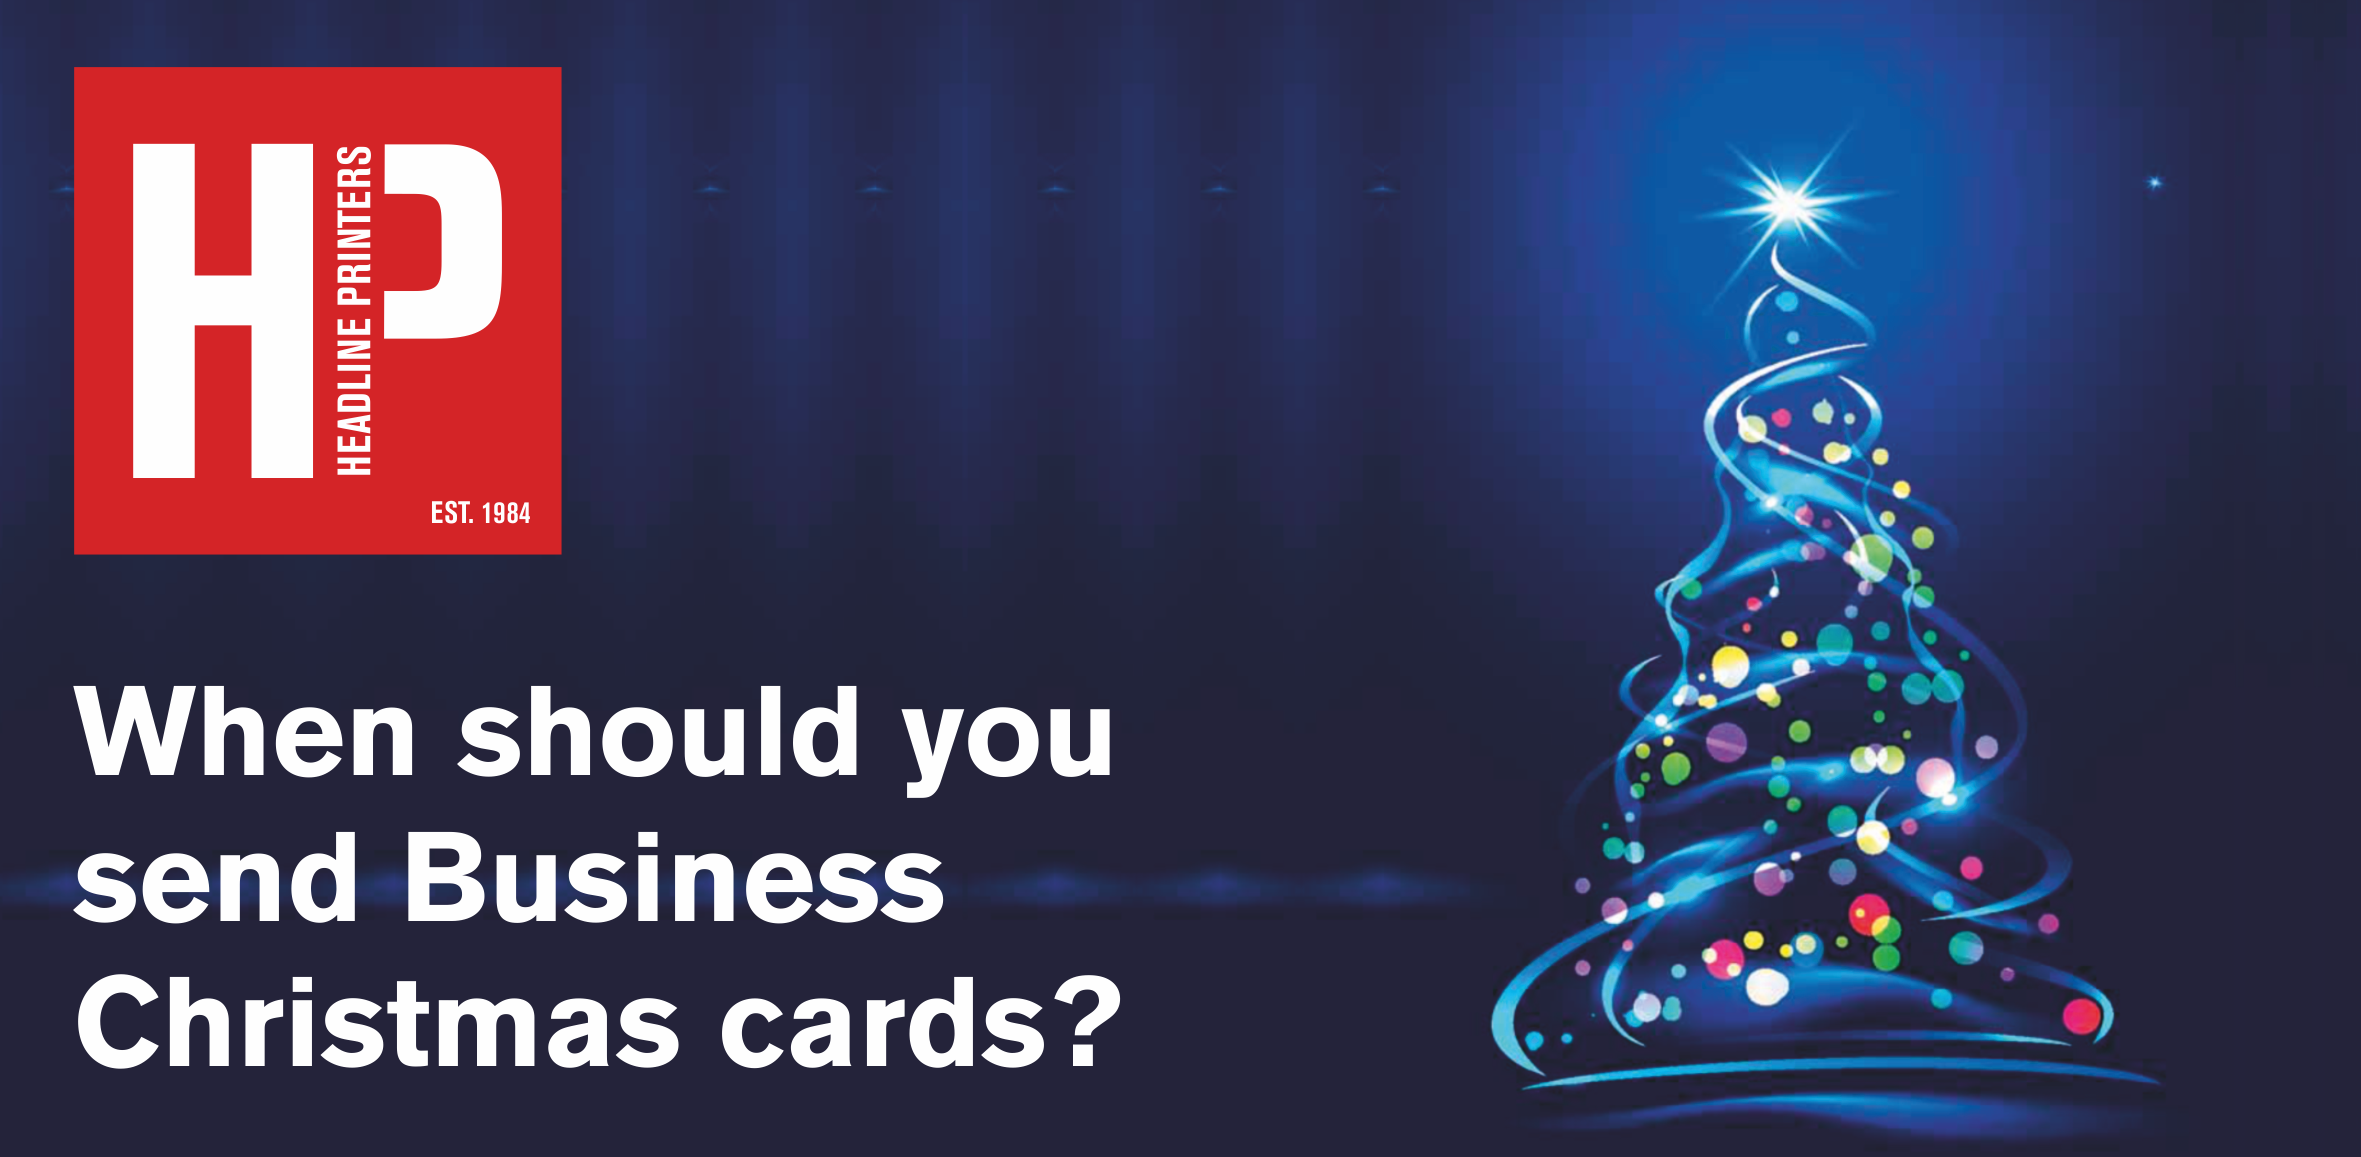 When should you send Business Christmas cards